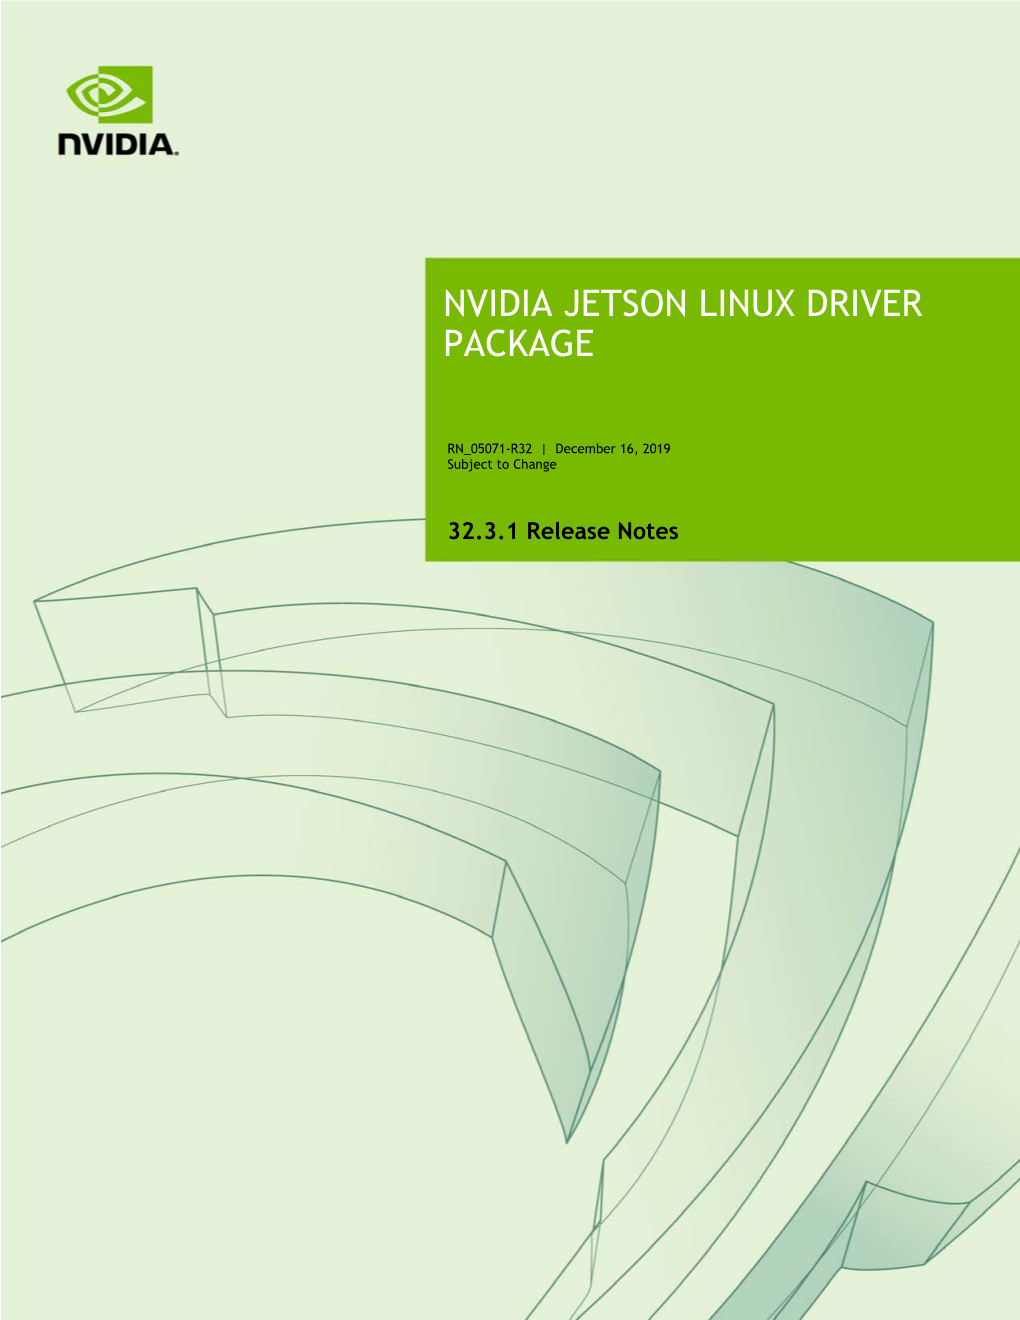 Nvidia Jetson Linux Driver Package